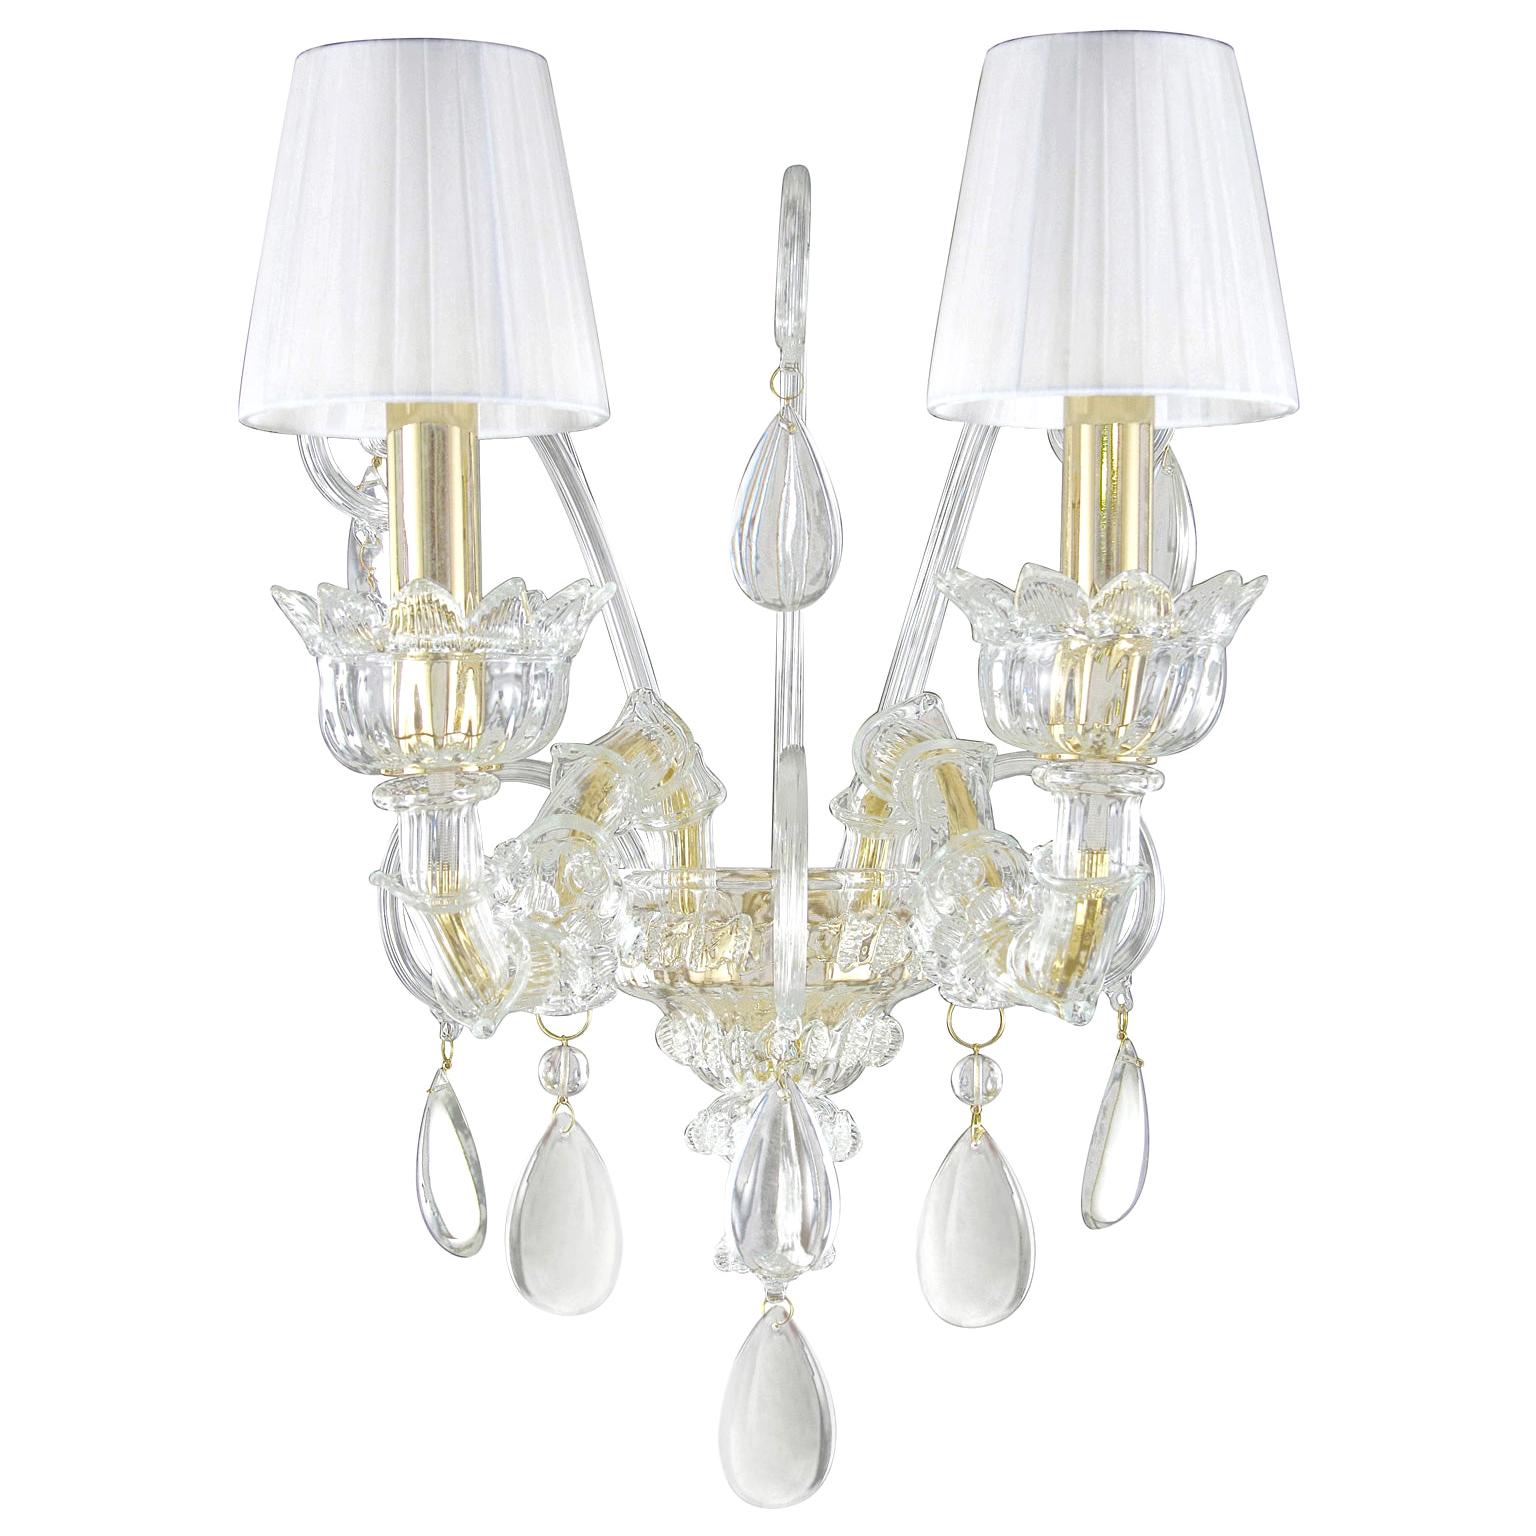 Sconce 2arms Venetian style Murano Glass, White Lampshades by Multiforme